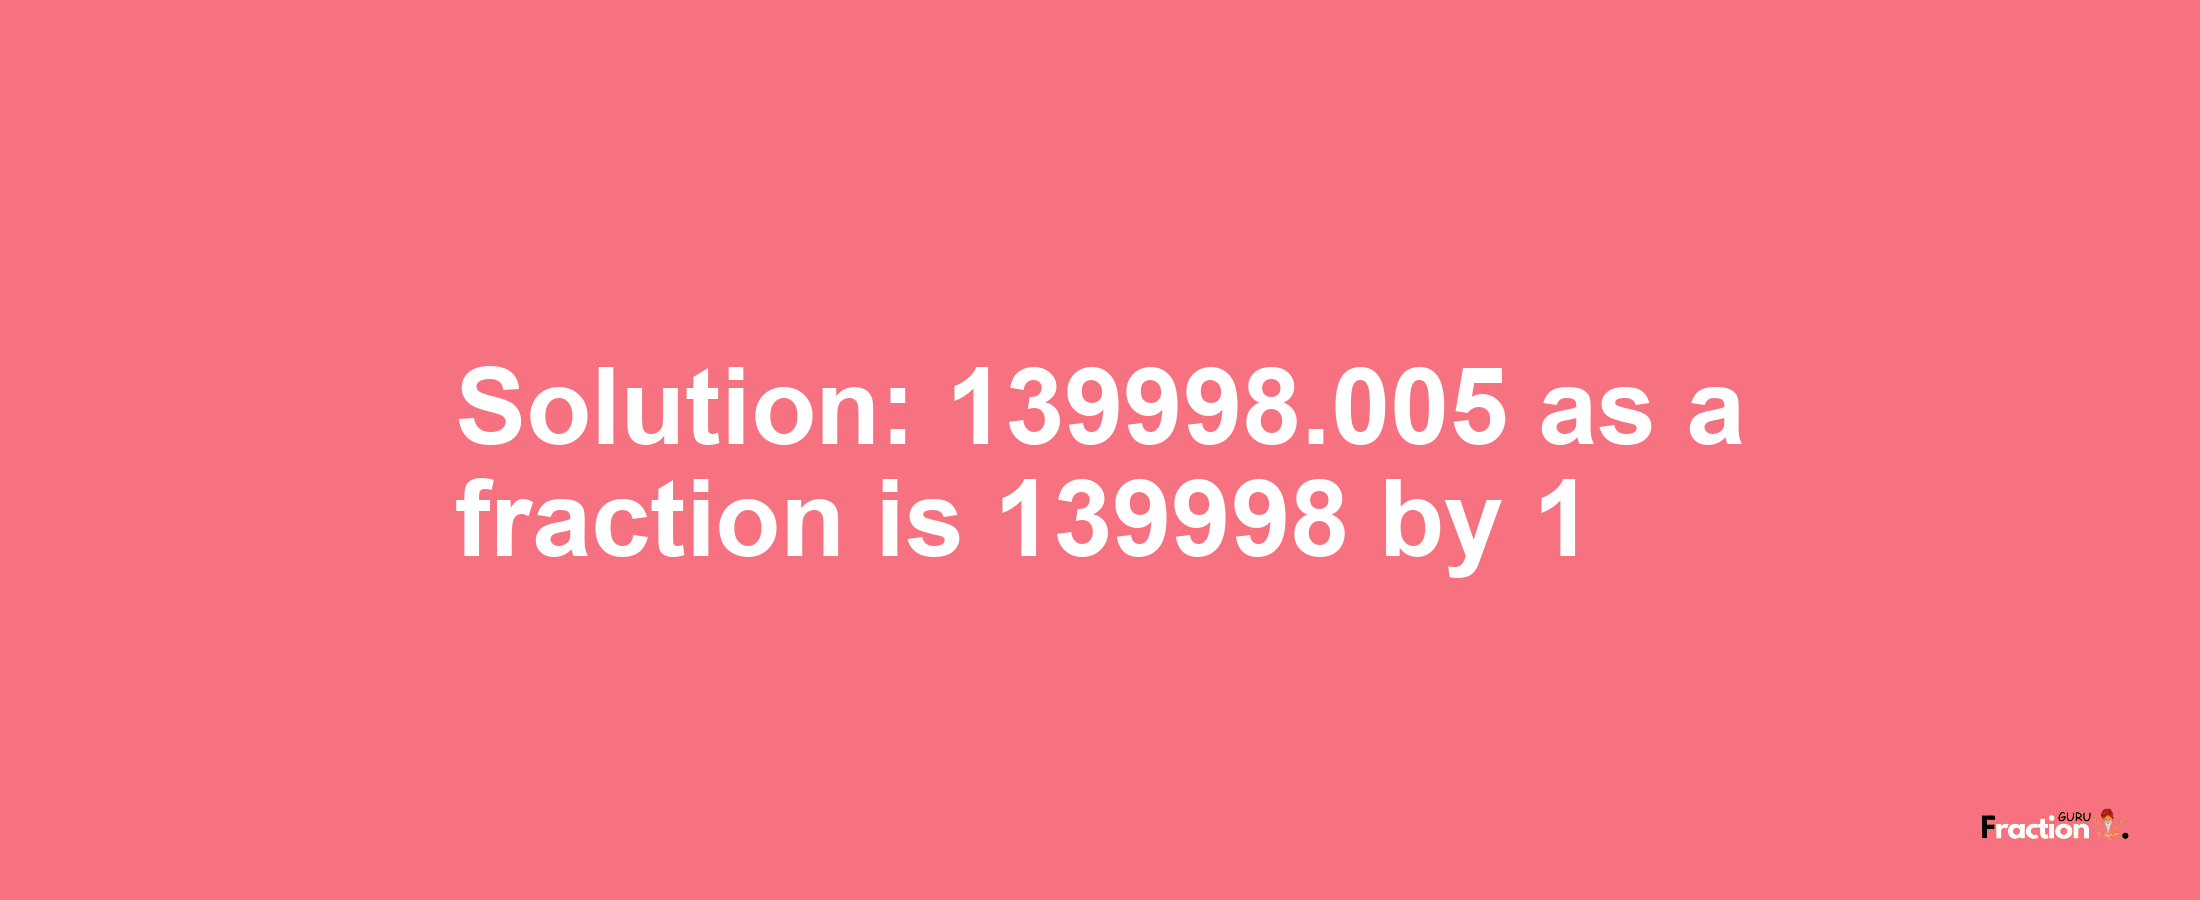 Solution:139998.005 as a fraction is 139998/1